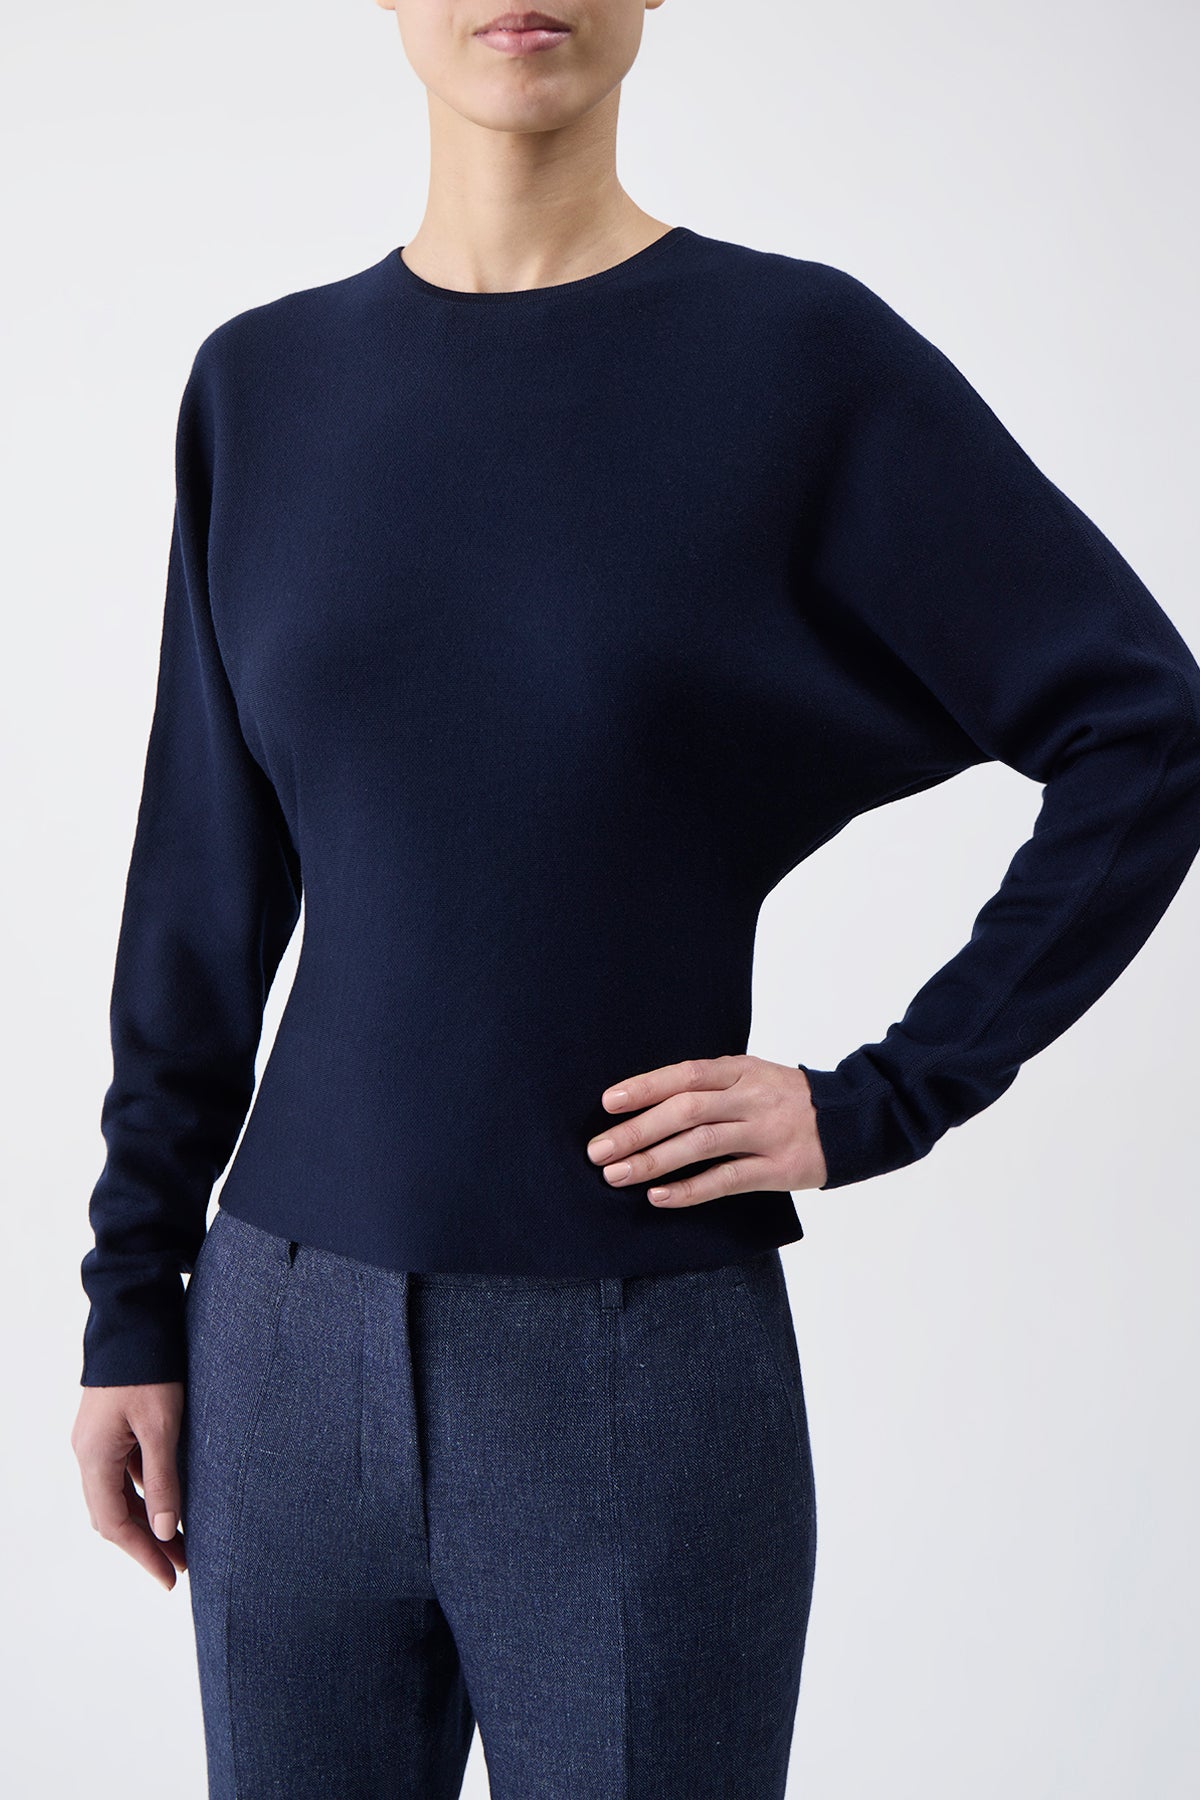 Theodore Knit Sweater in Navy Silk Cashmere